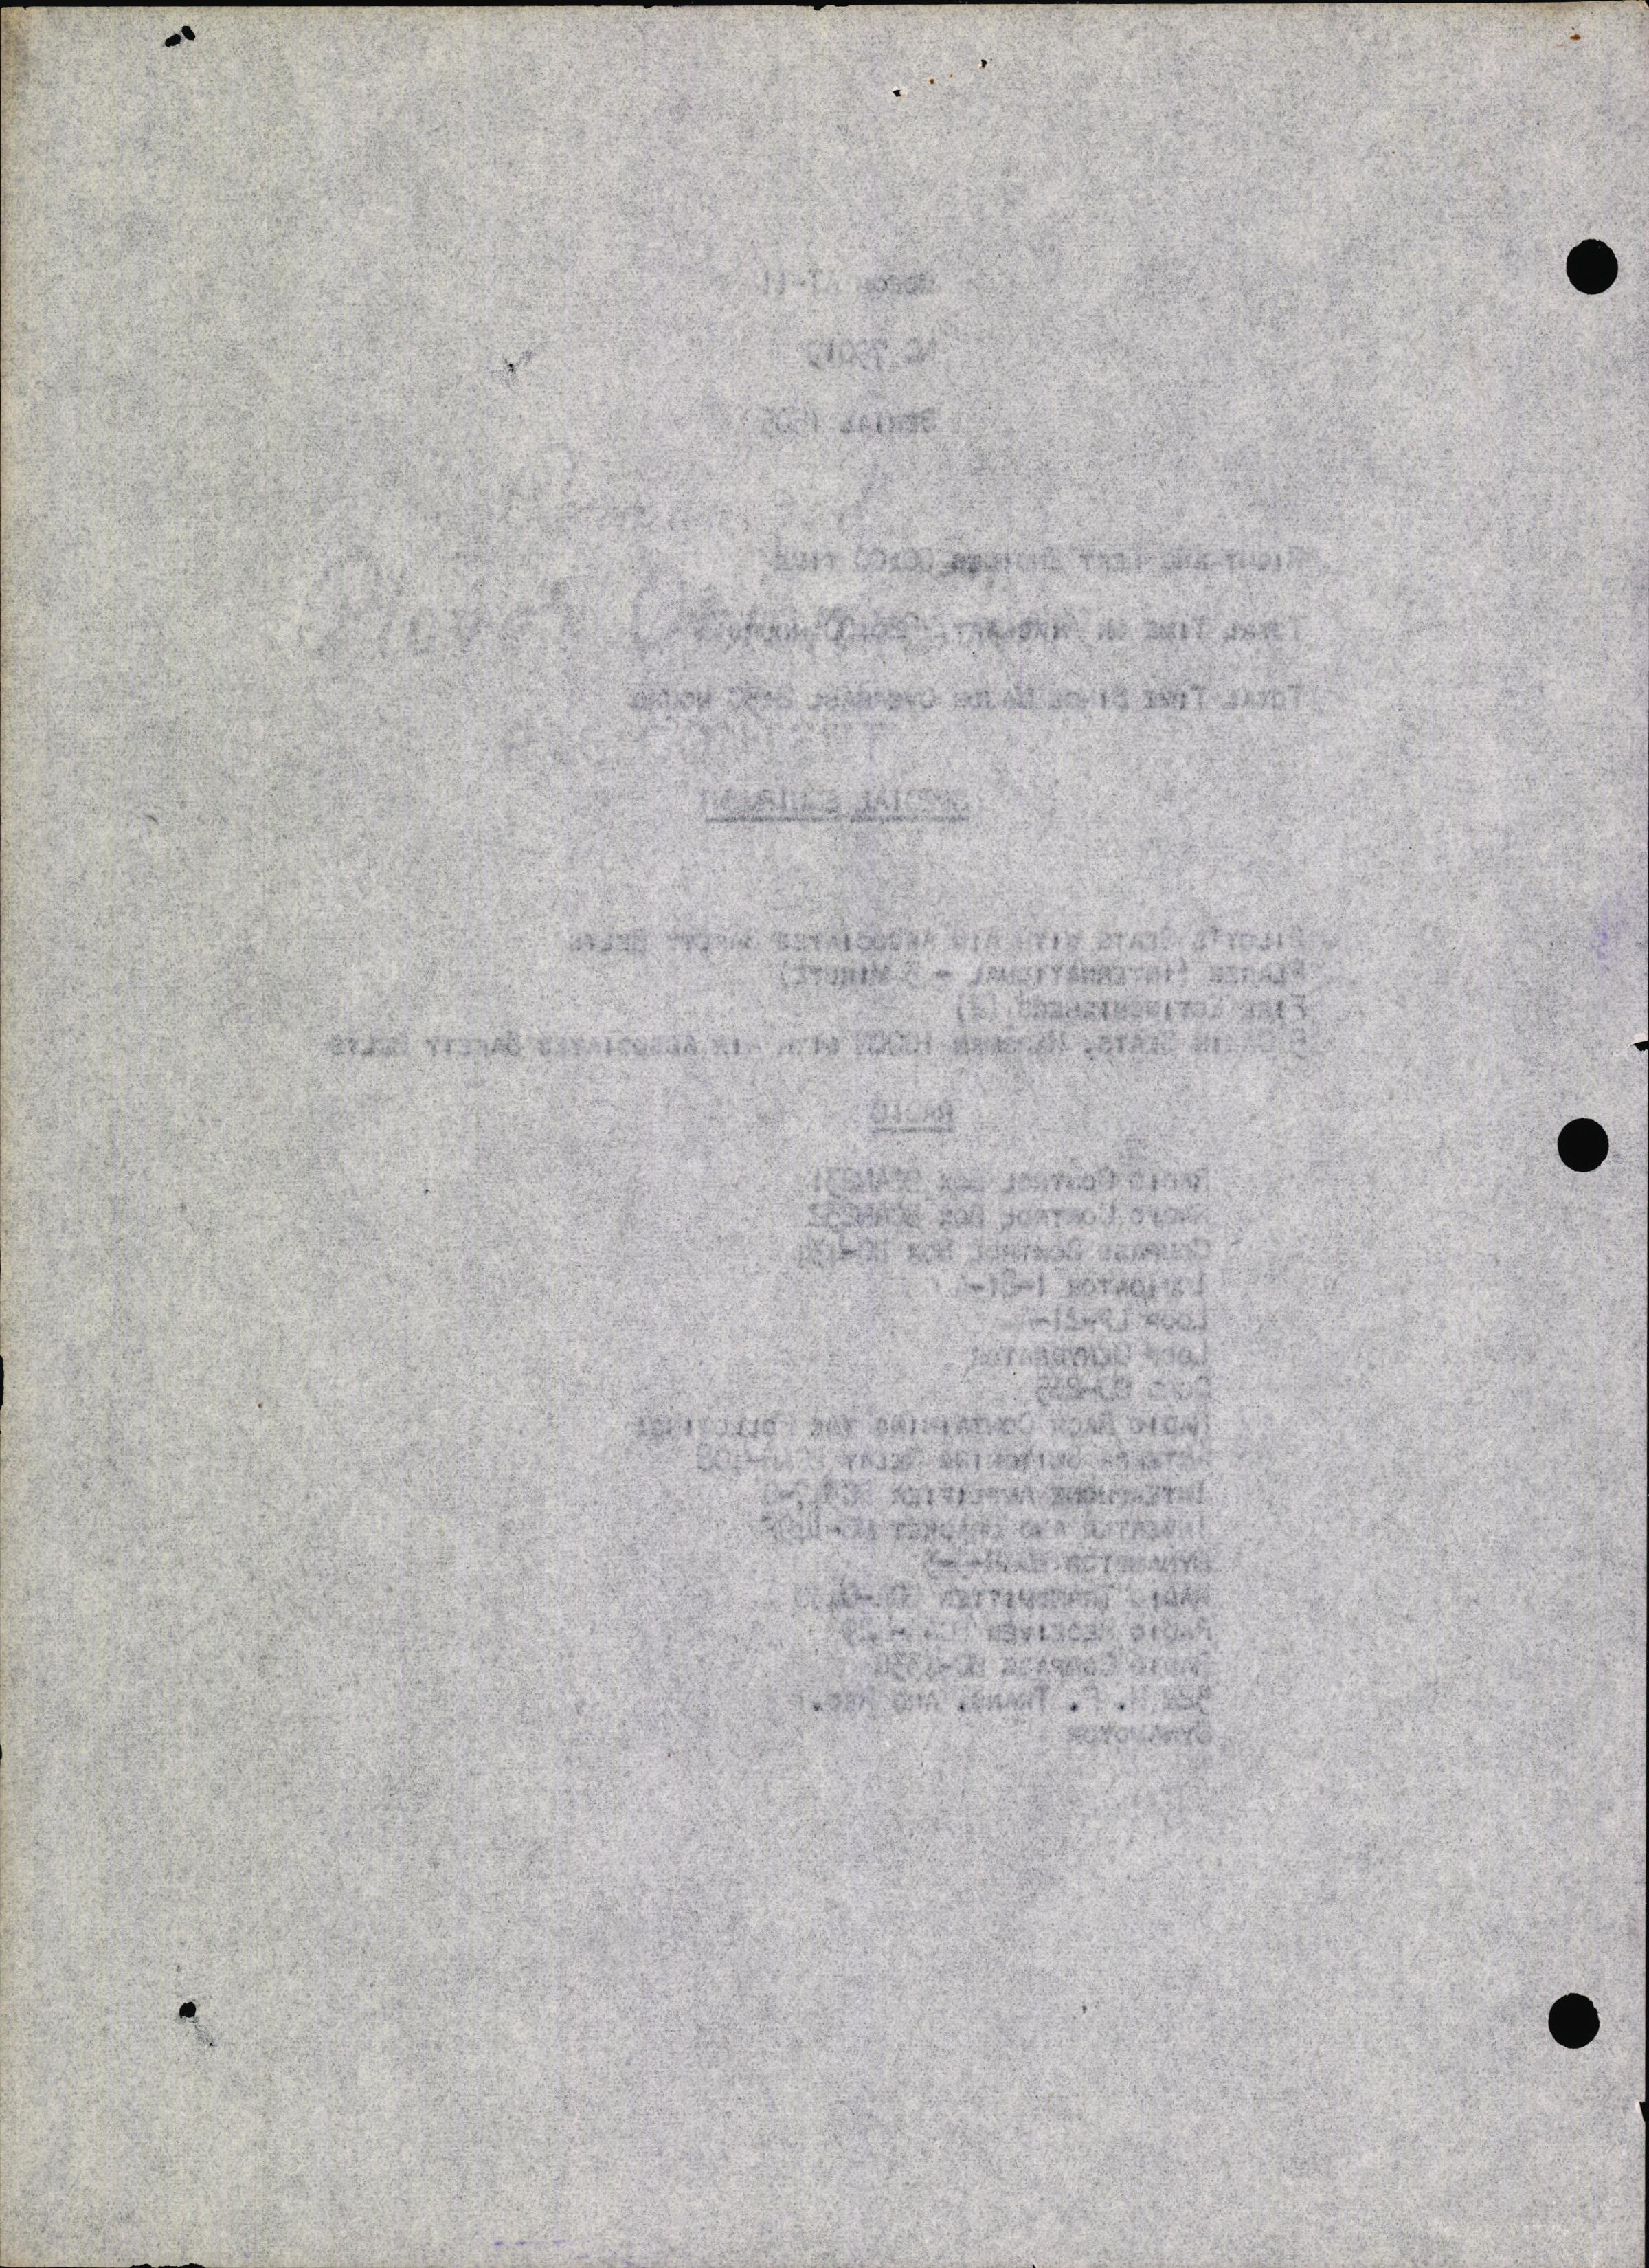 Sample page 8 from AirCorps Library document: Technical Information for Serial Number 1505